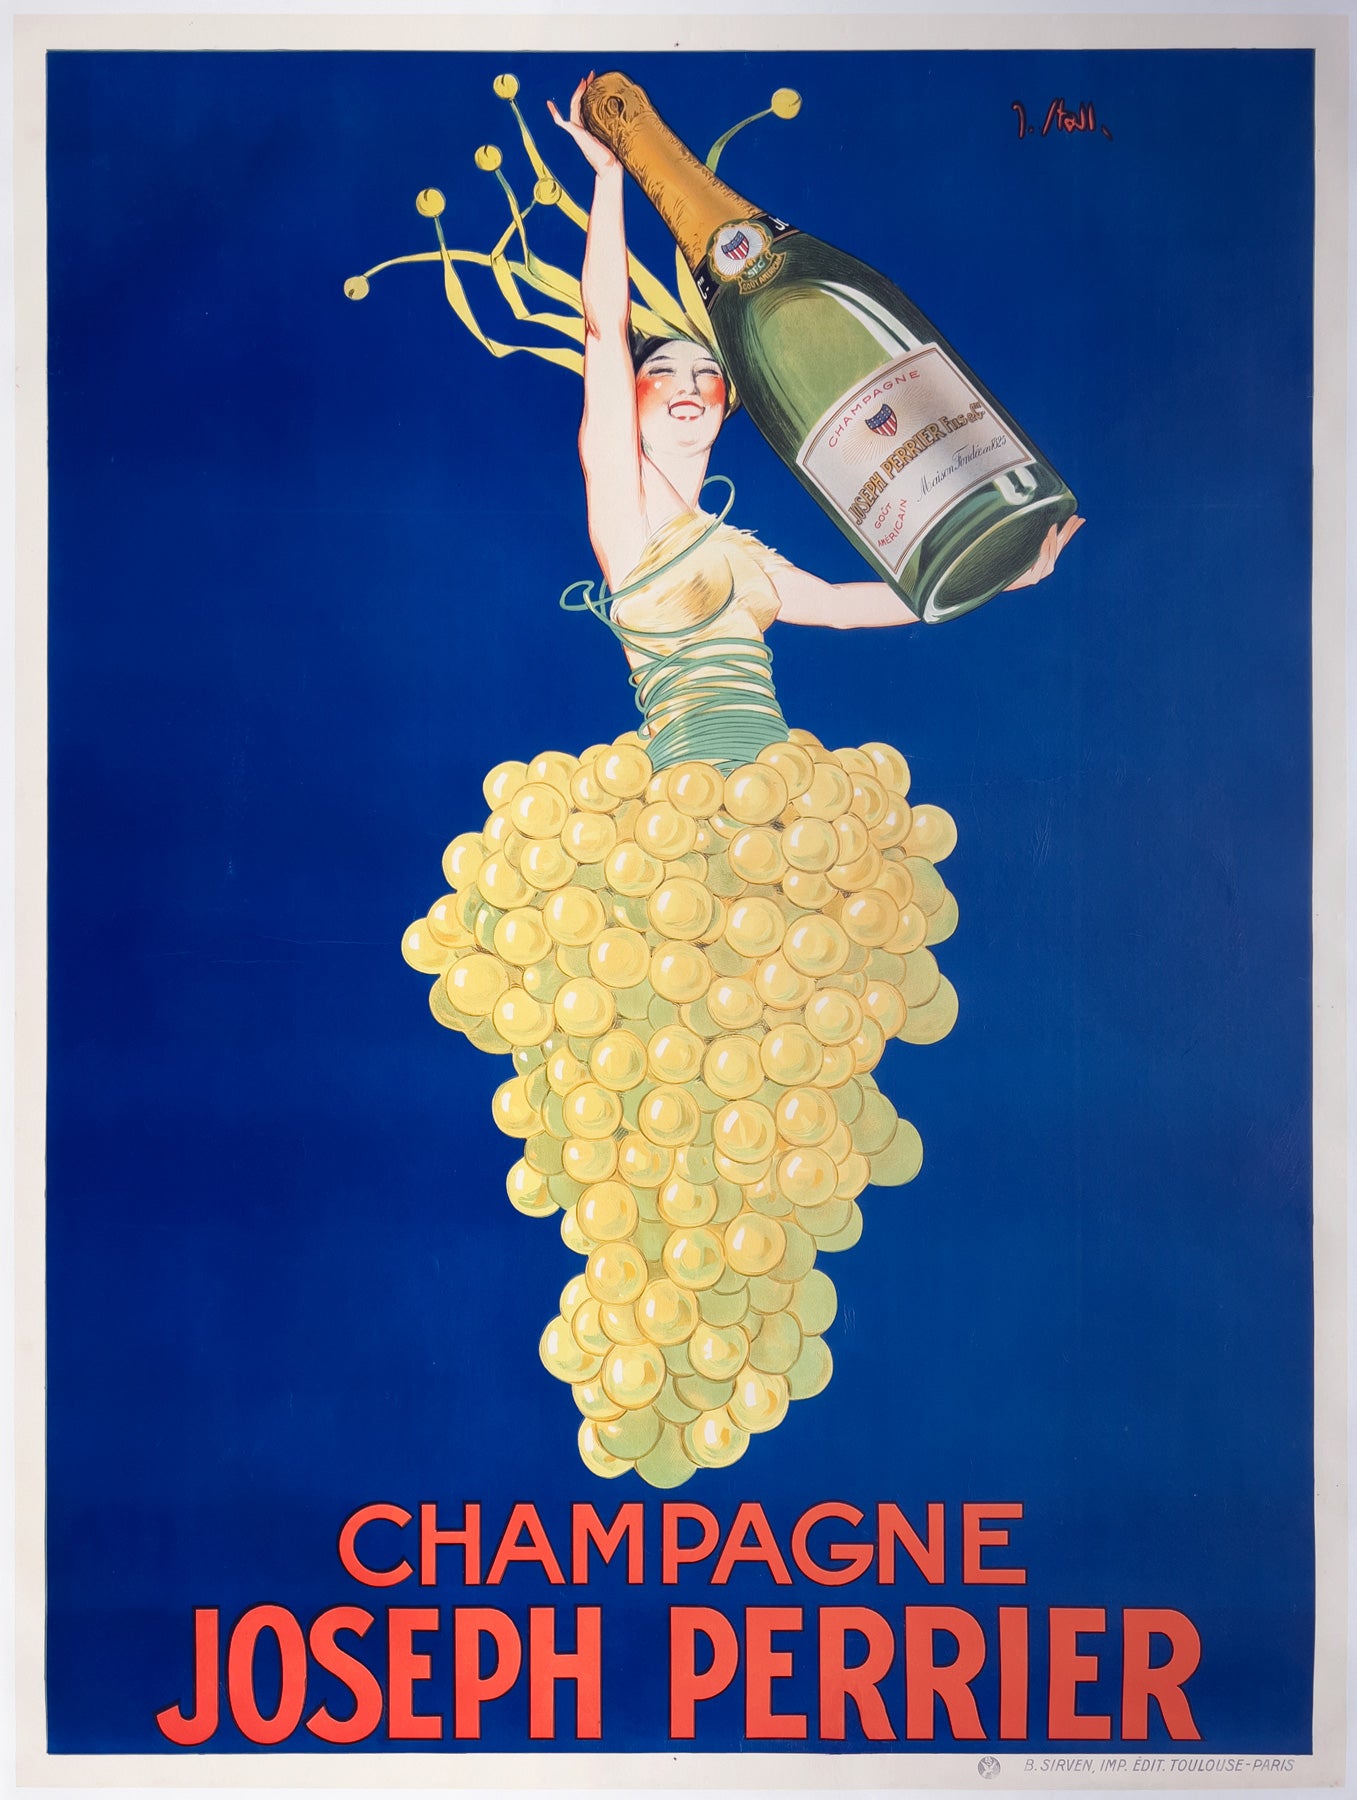 Joseph Perrier c1930 Champagne Vintage French Alcohol Poster, Joseph Stall